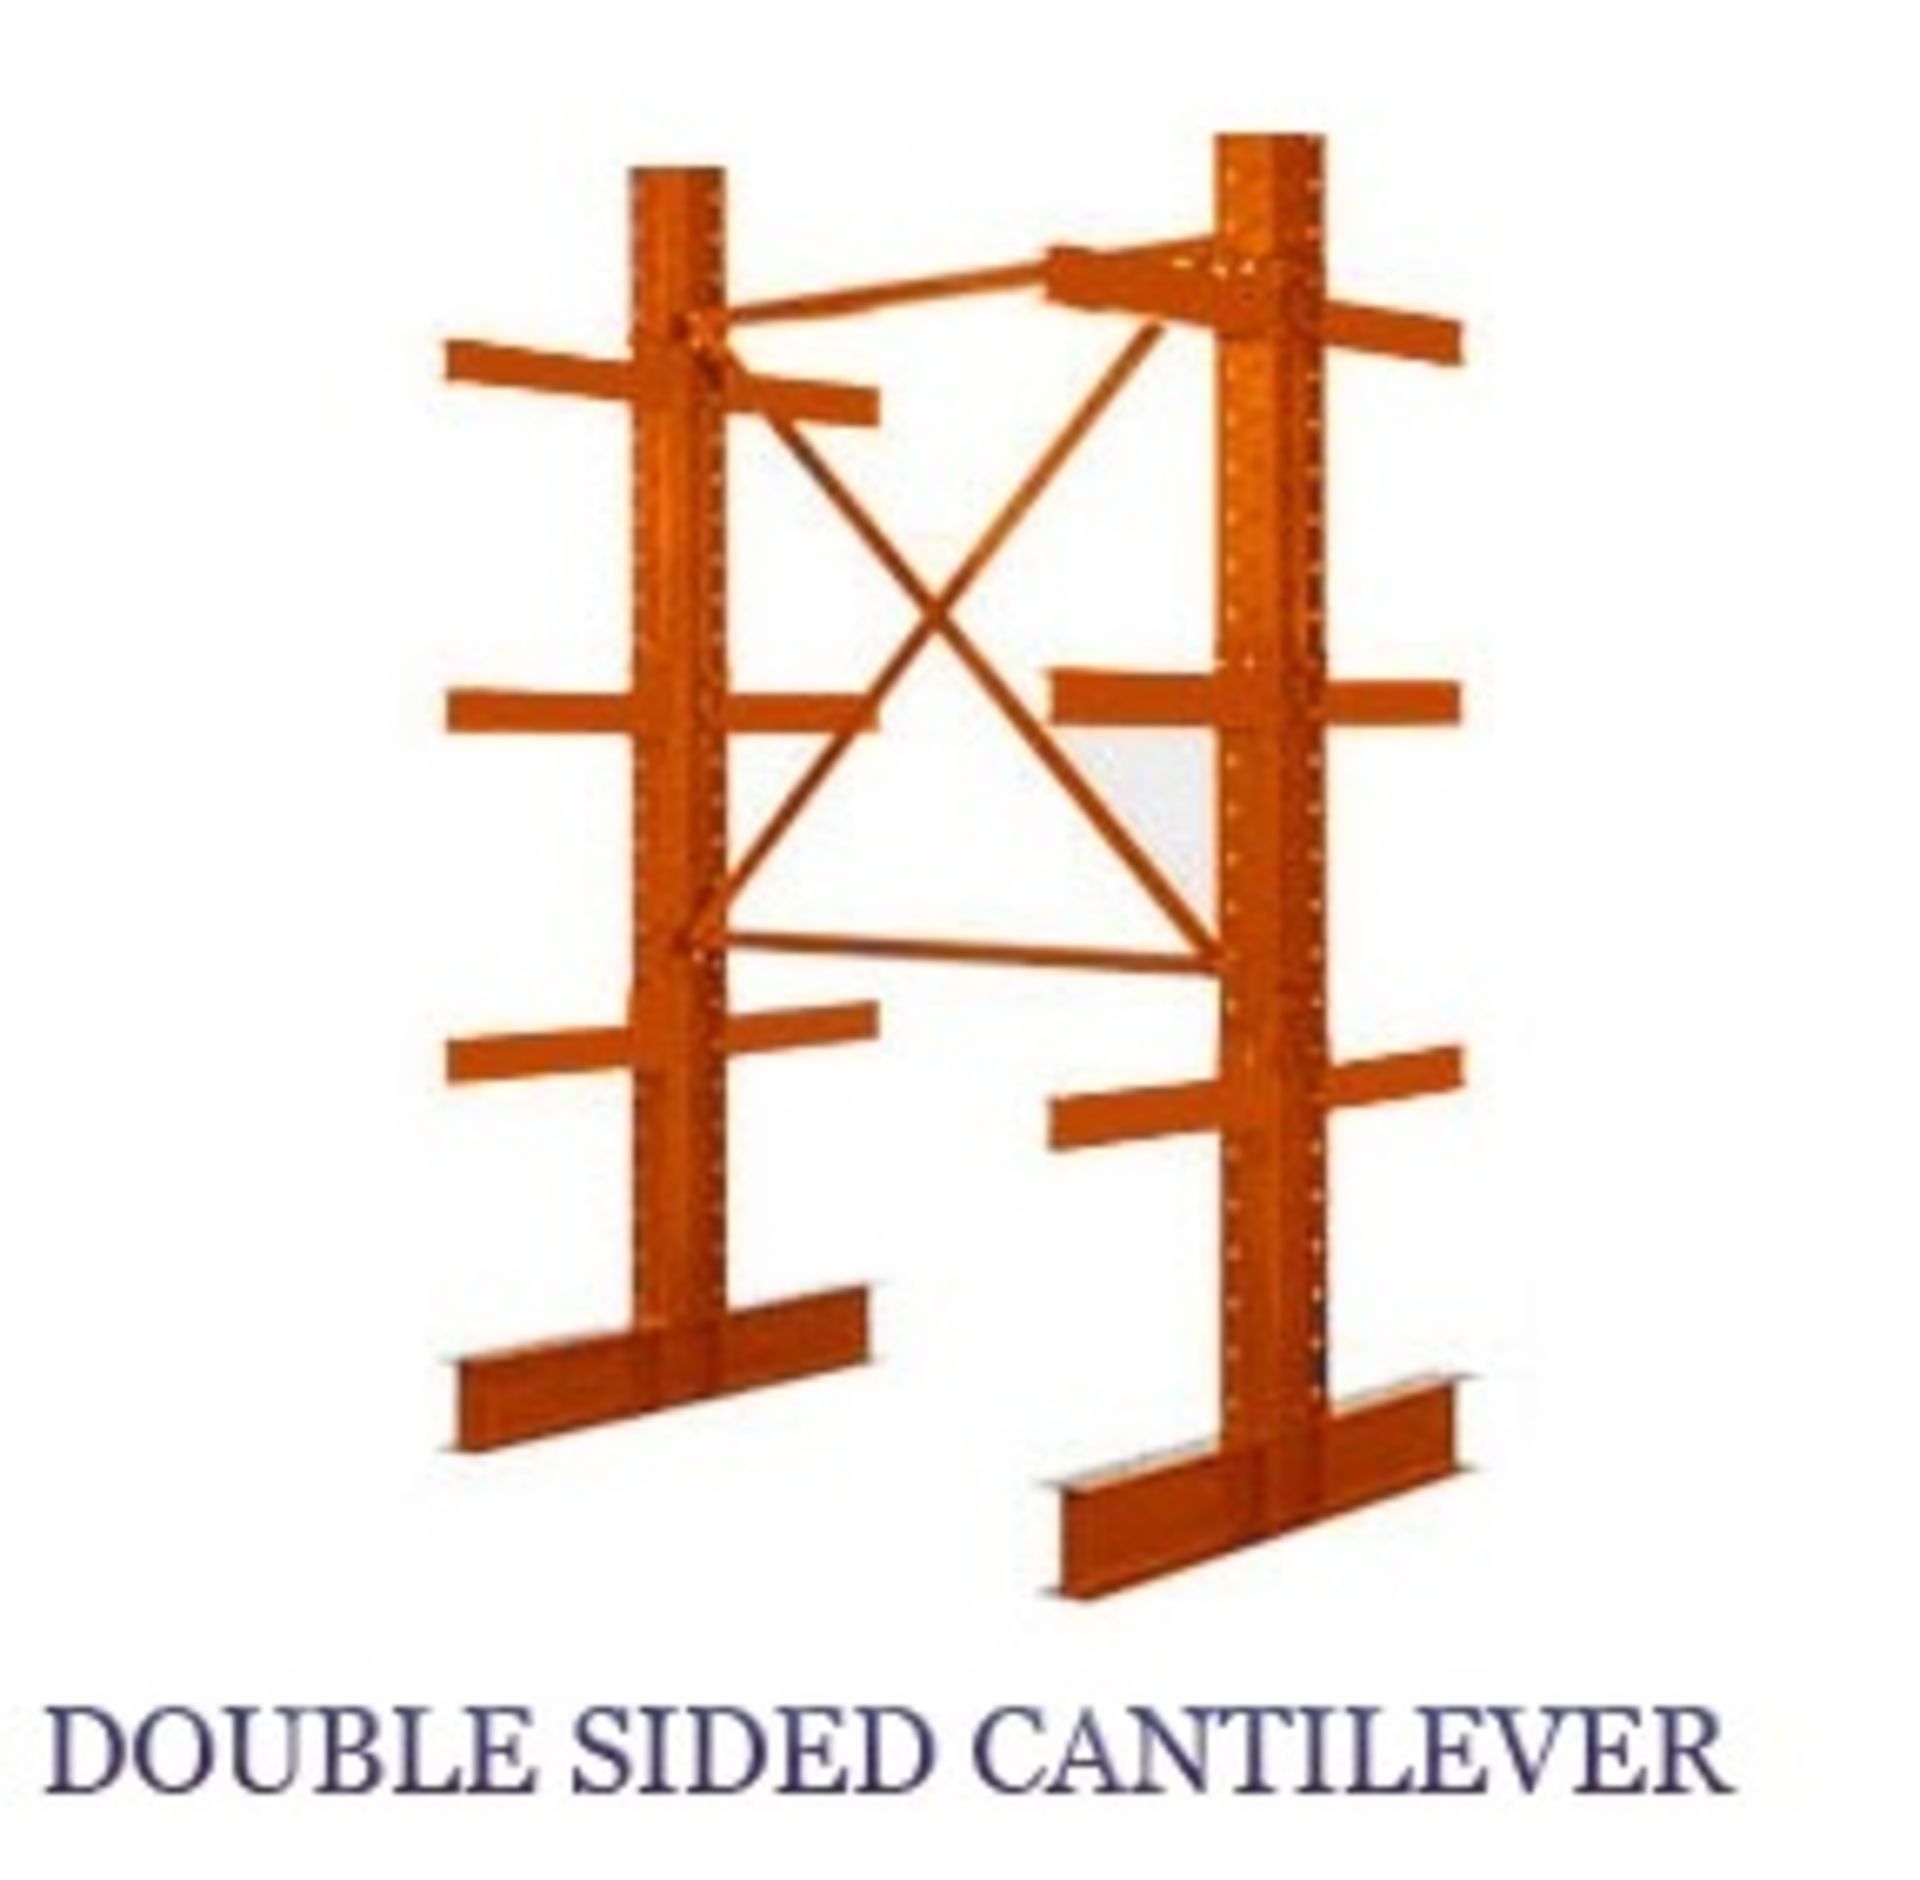 9 SECTIONS OF NEW DOUBLE SIDED CANTILEVER,